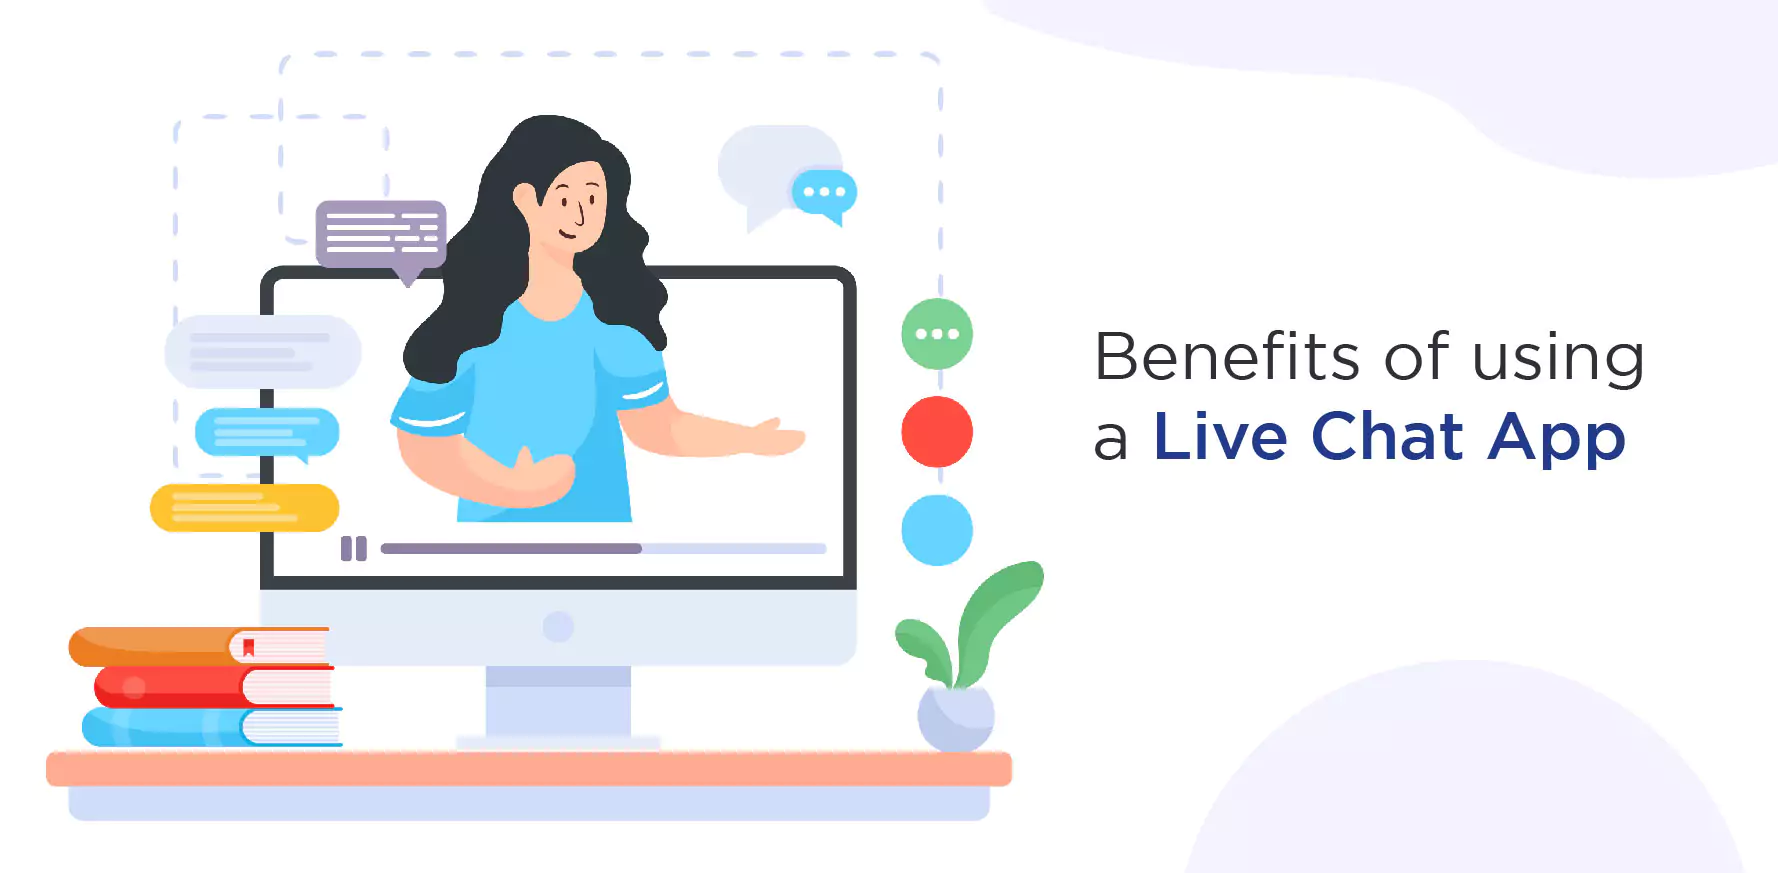 Benefits of using a Live Chat App